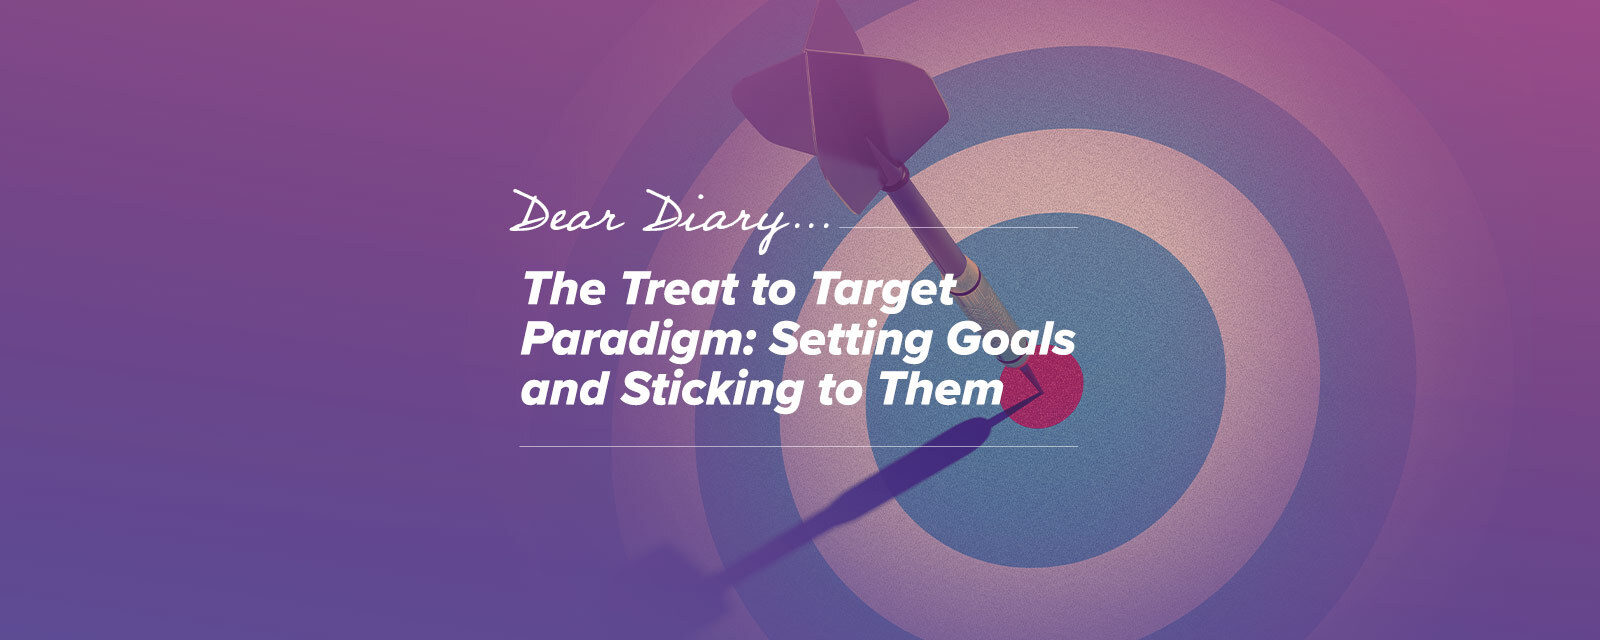 The Treat to Target Paradigm: Setting Goals and Sticking to Them